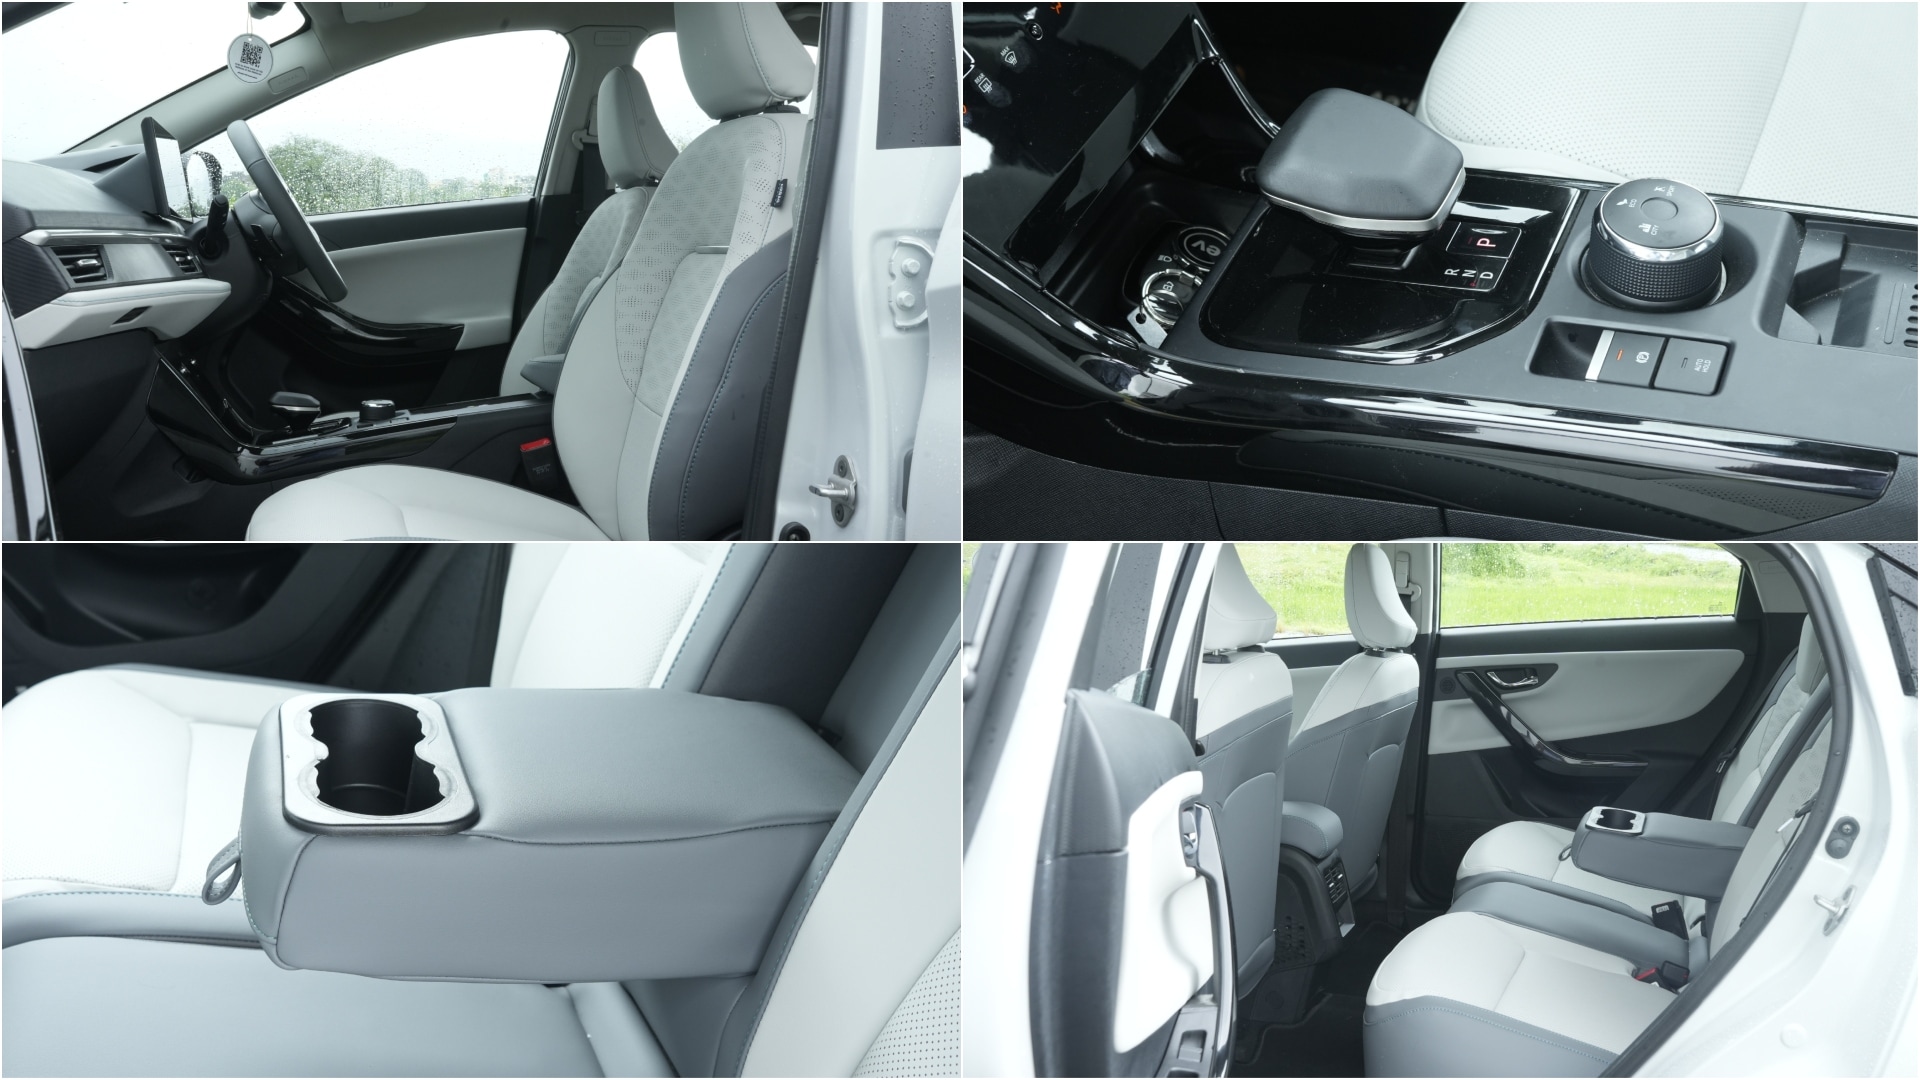 The white and grey leatherette upholstery feels premium, while the front seats gets ventilation. There's no change in the cabin's proportions over its predecessor. 